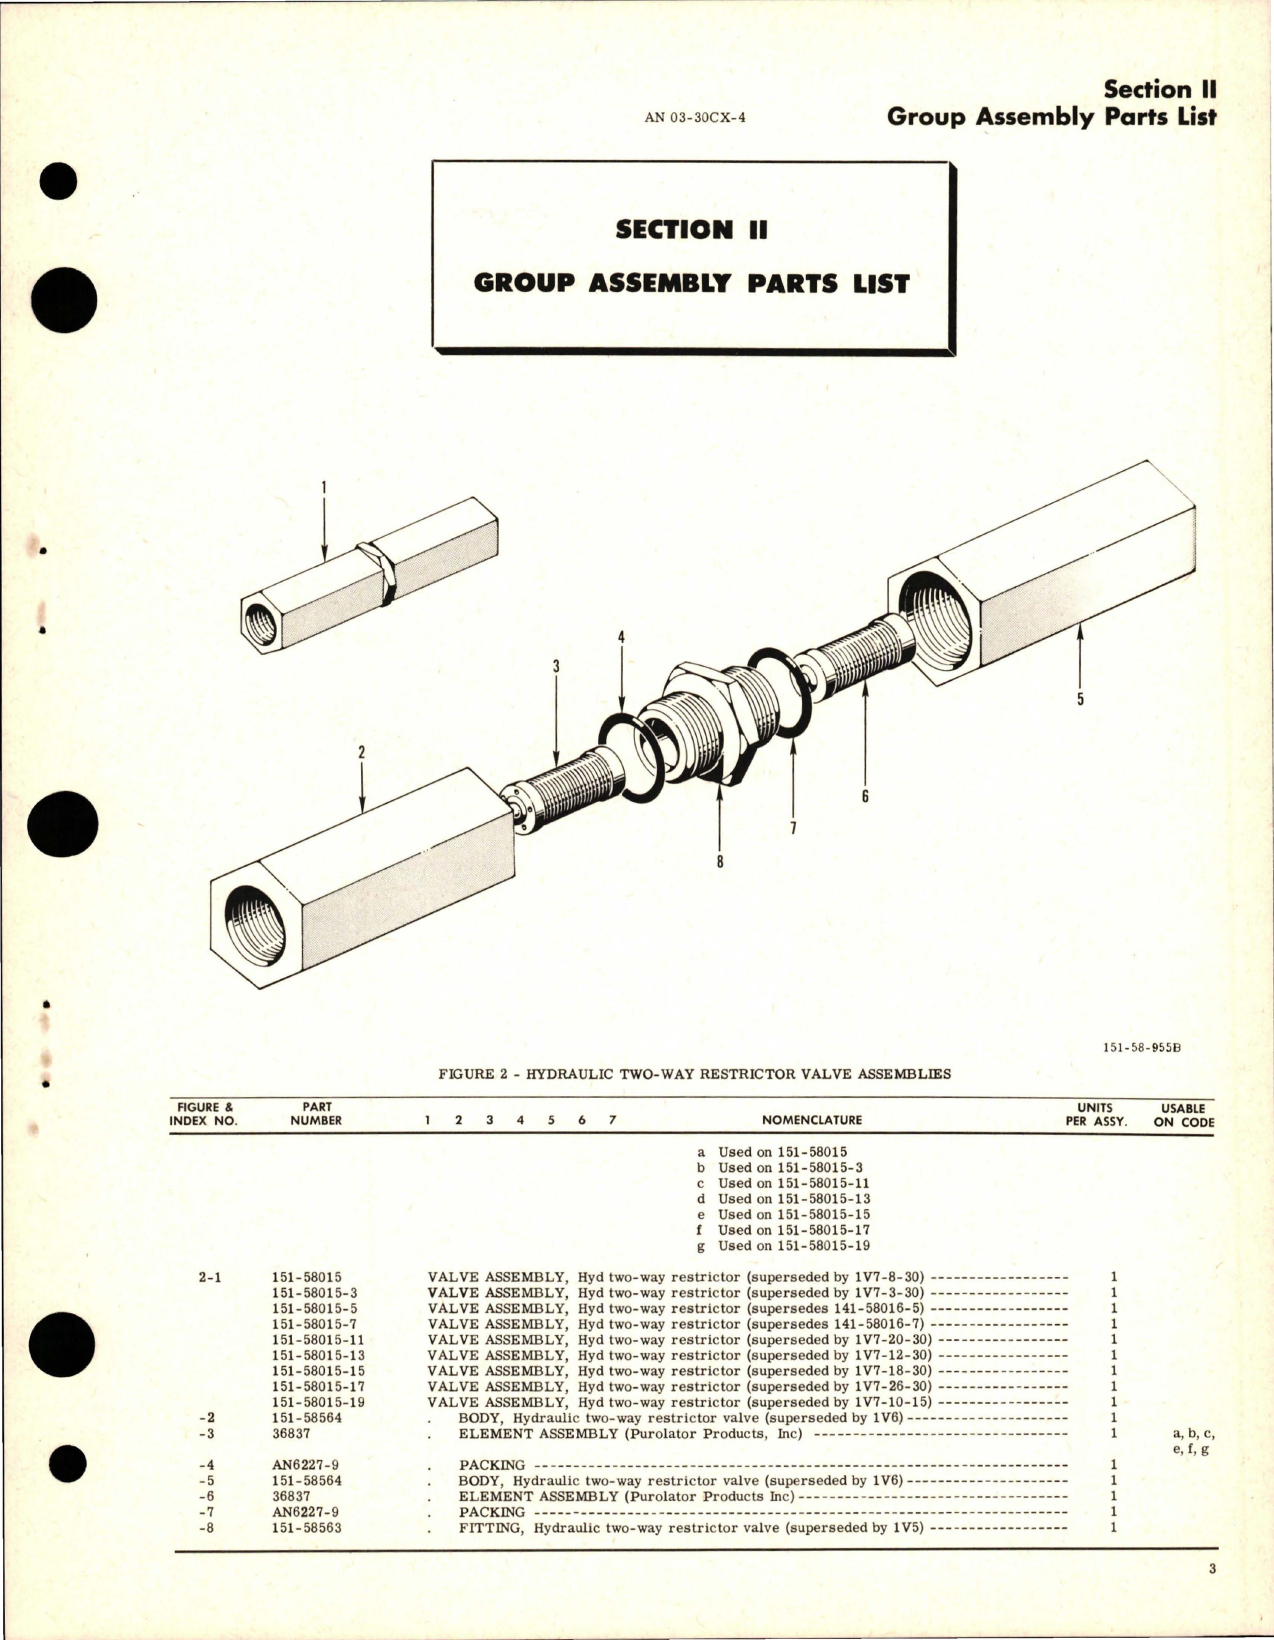 Sample page 5 from AirCorps Library document: Illustrated Parts Breakdown for Hydraulic Valves and Dampeners 